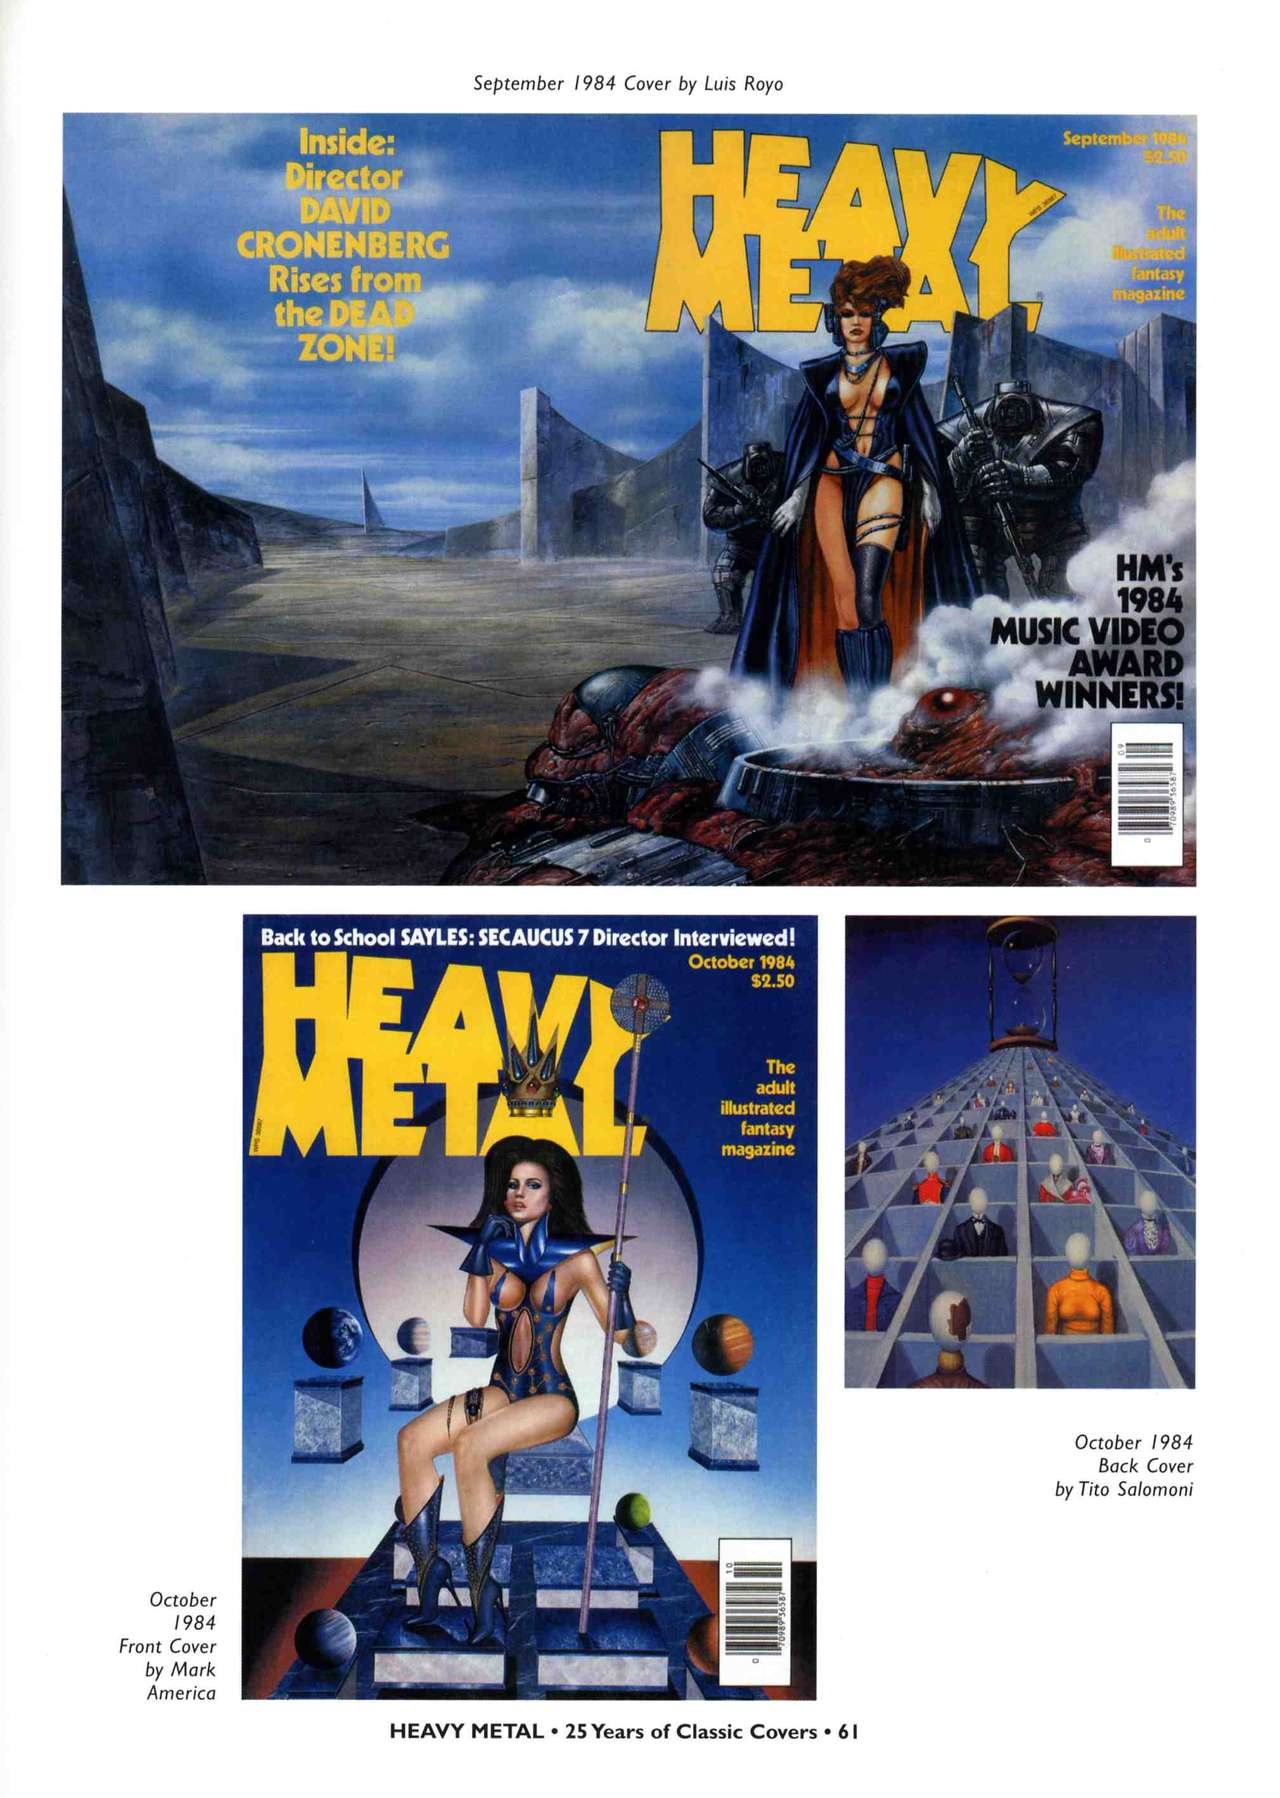 HEAVY METAL 25 Years of Classic Covers 66